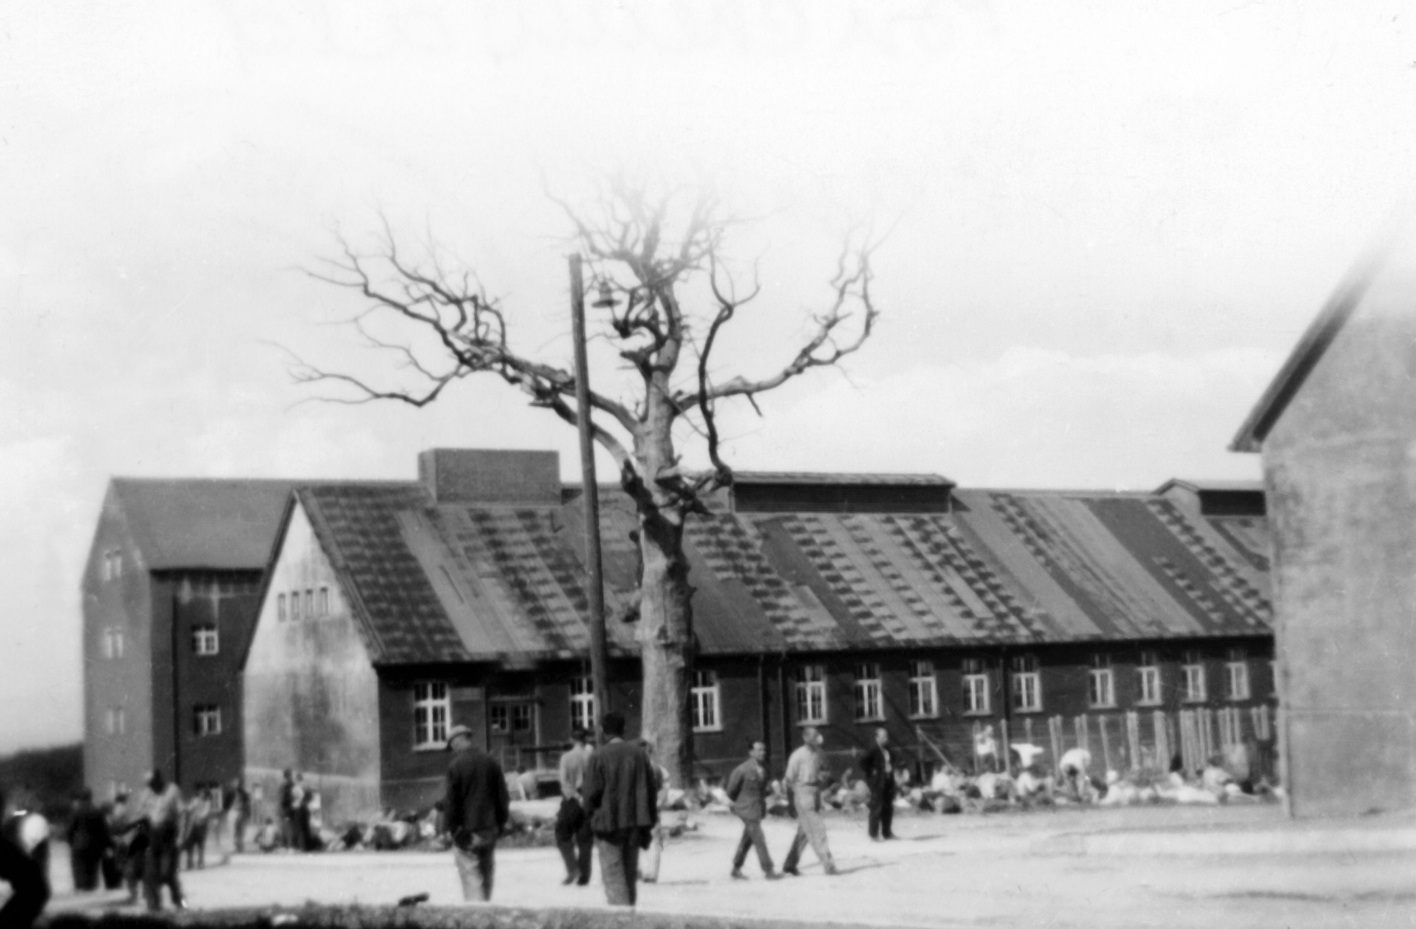 Prisoners walking on the camp road. View of the Goethe oak tree. In the background the laundry, behind it the chamber building. In the far right foreground the prisoners' kitchen building.